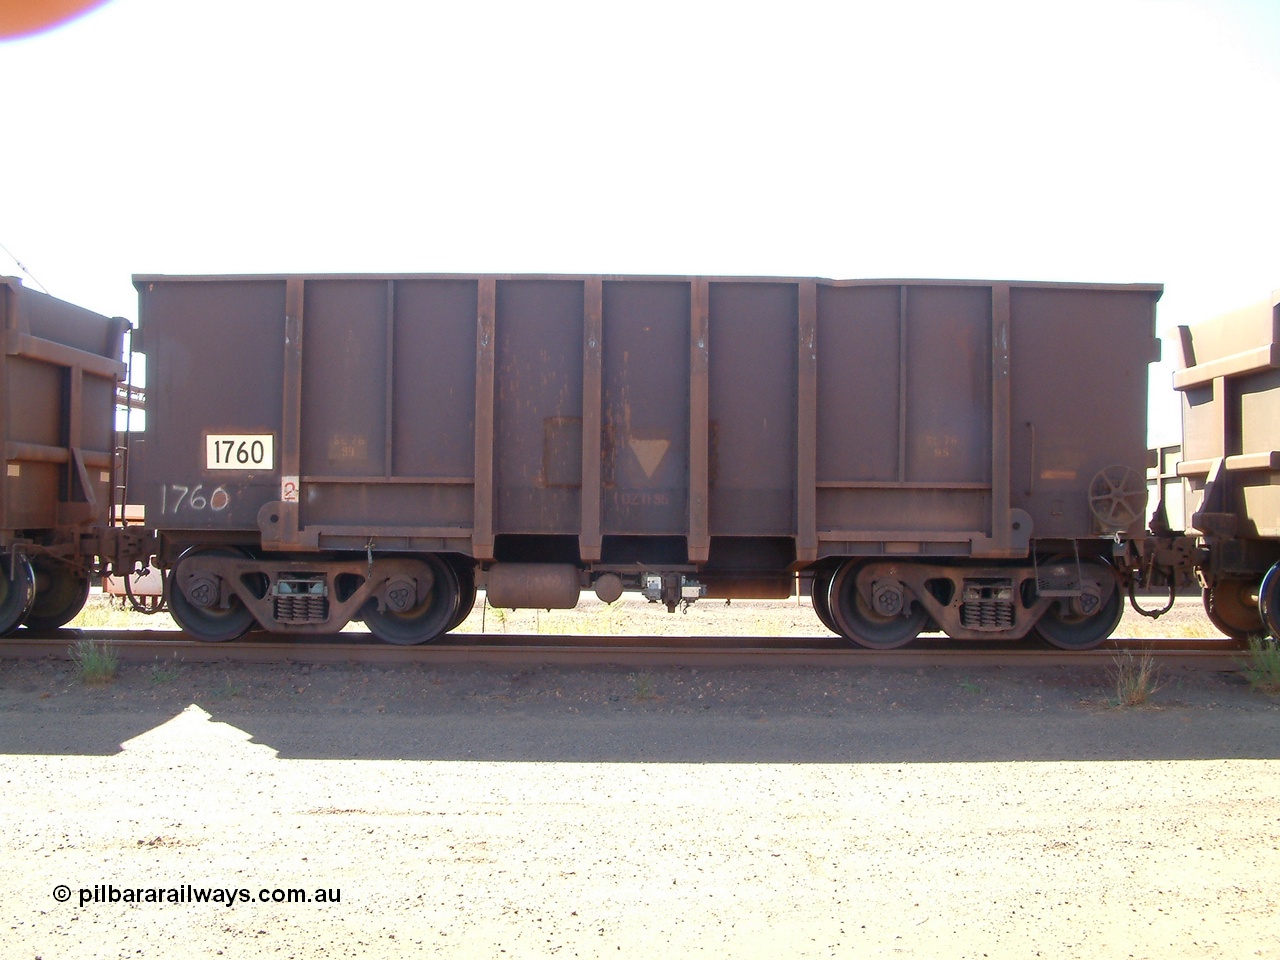 040412 143532
Nelson Point, Comeng WA built ore waggon 1760 one of 288 waggons built in 1974. 12th April 2004.
Keywords: 1760;Comeng-WA;BHP-ore-waggon;